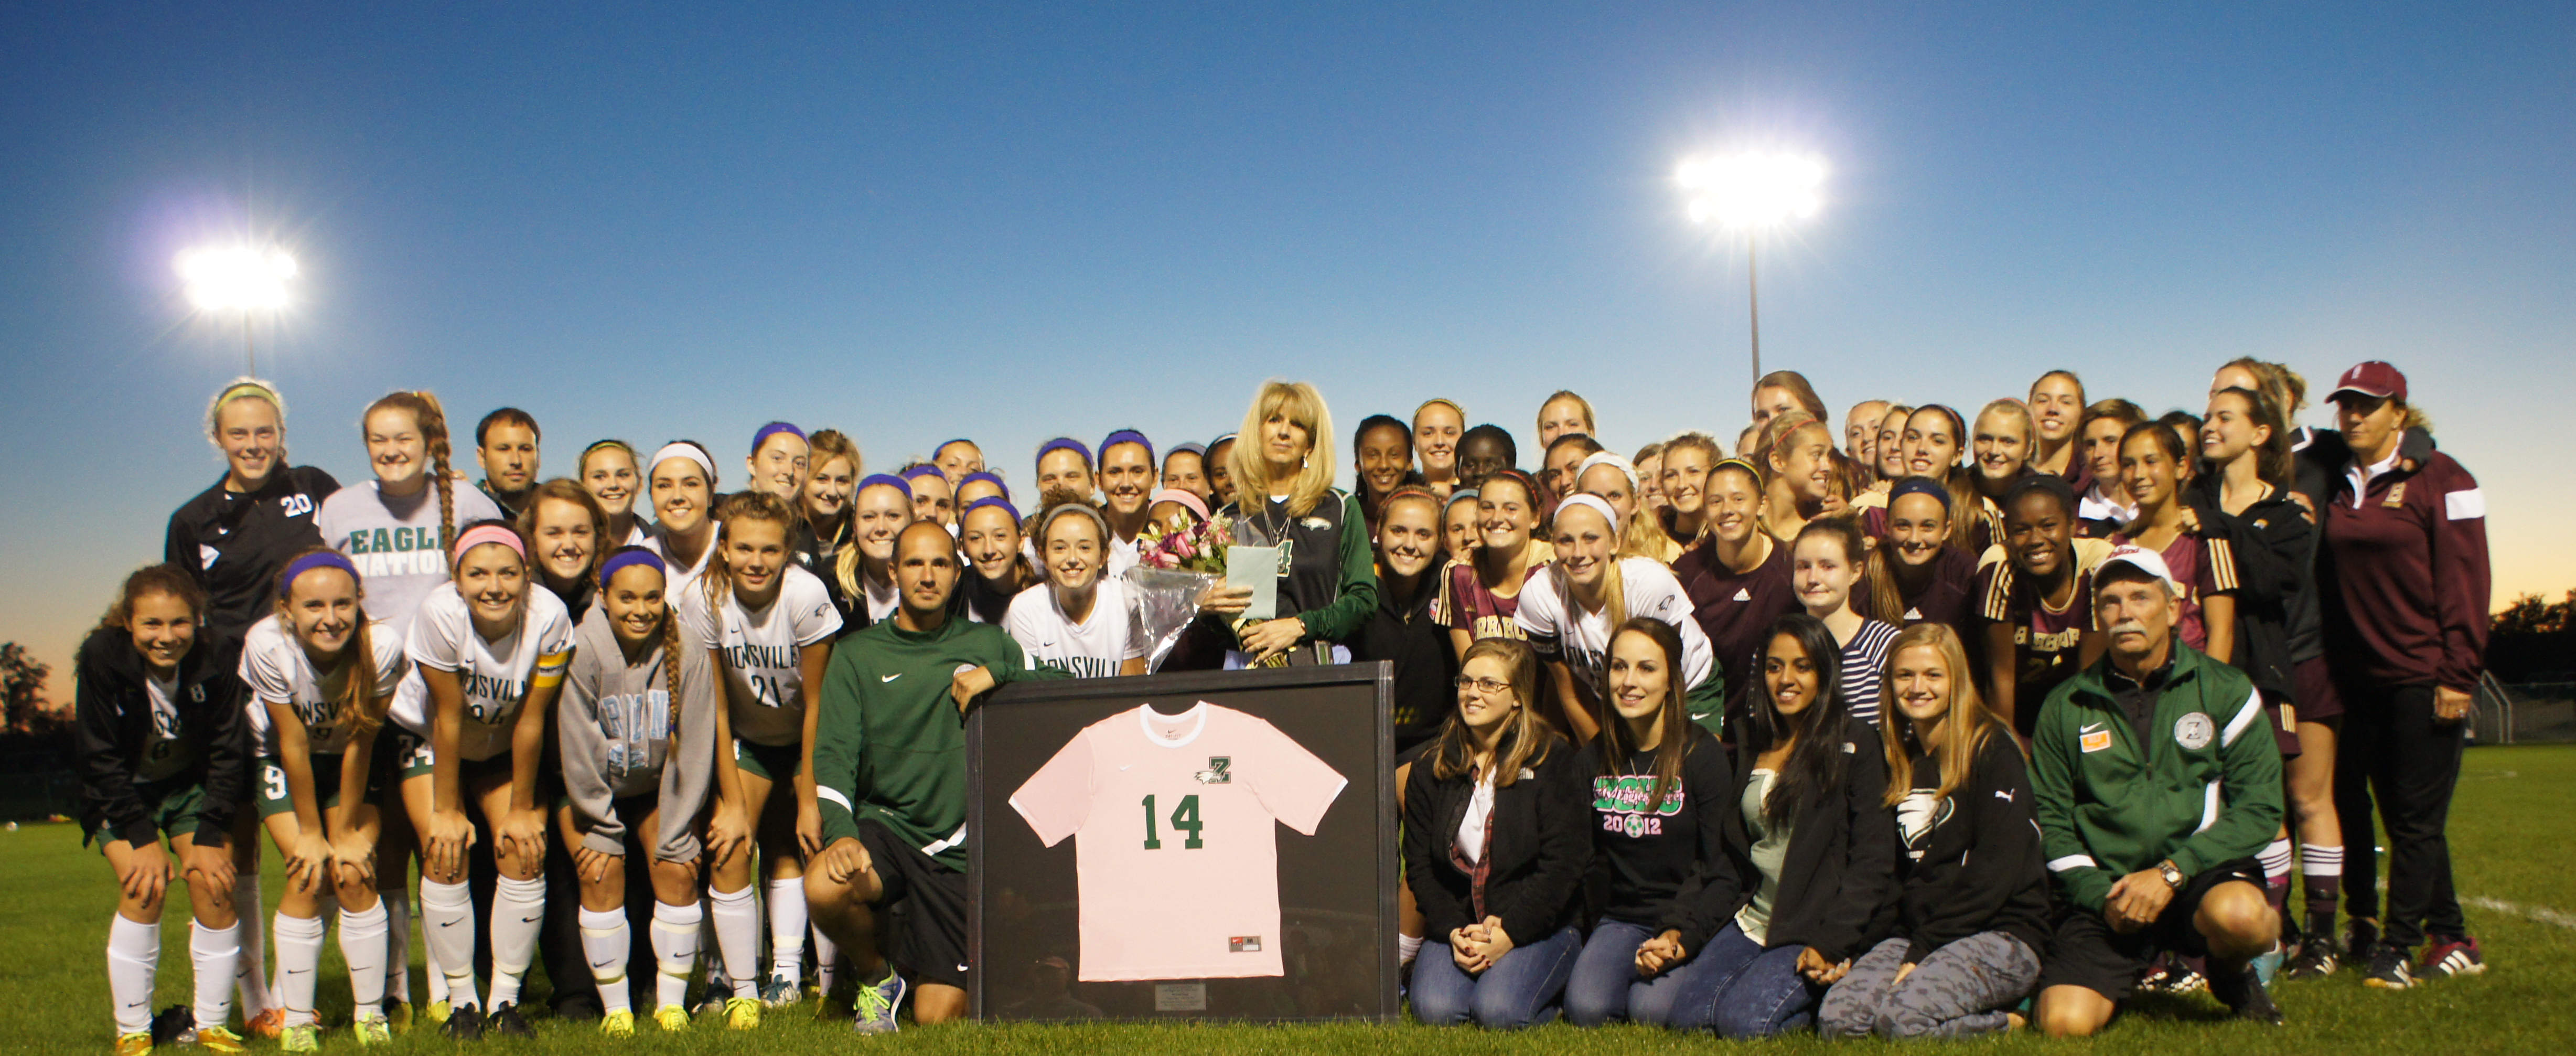 Rachael Fiege 14 and Jersey Retirement 029FEAT